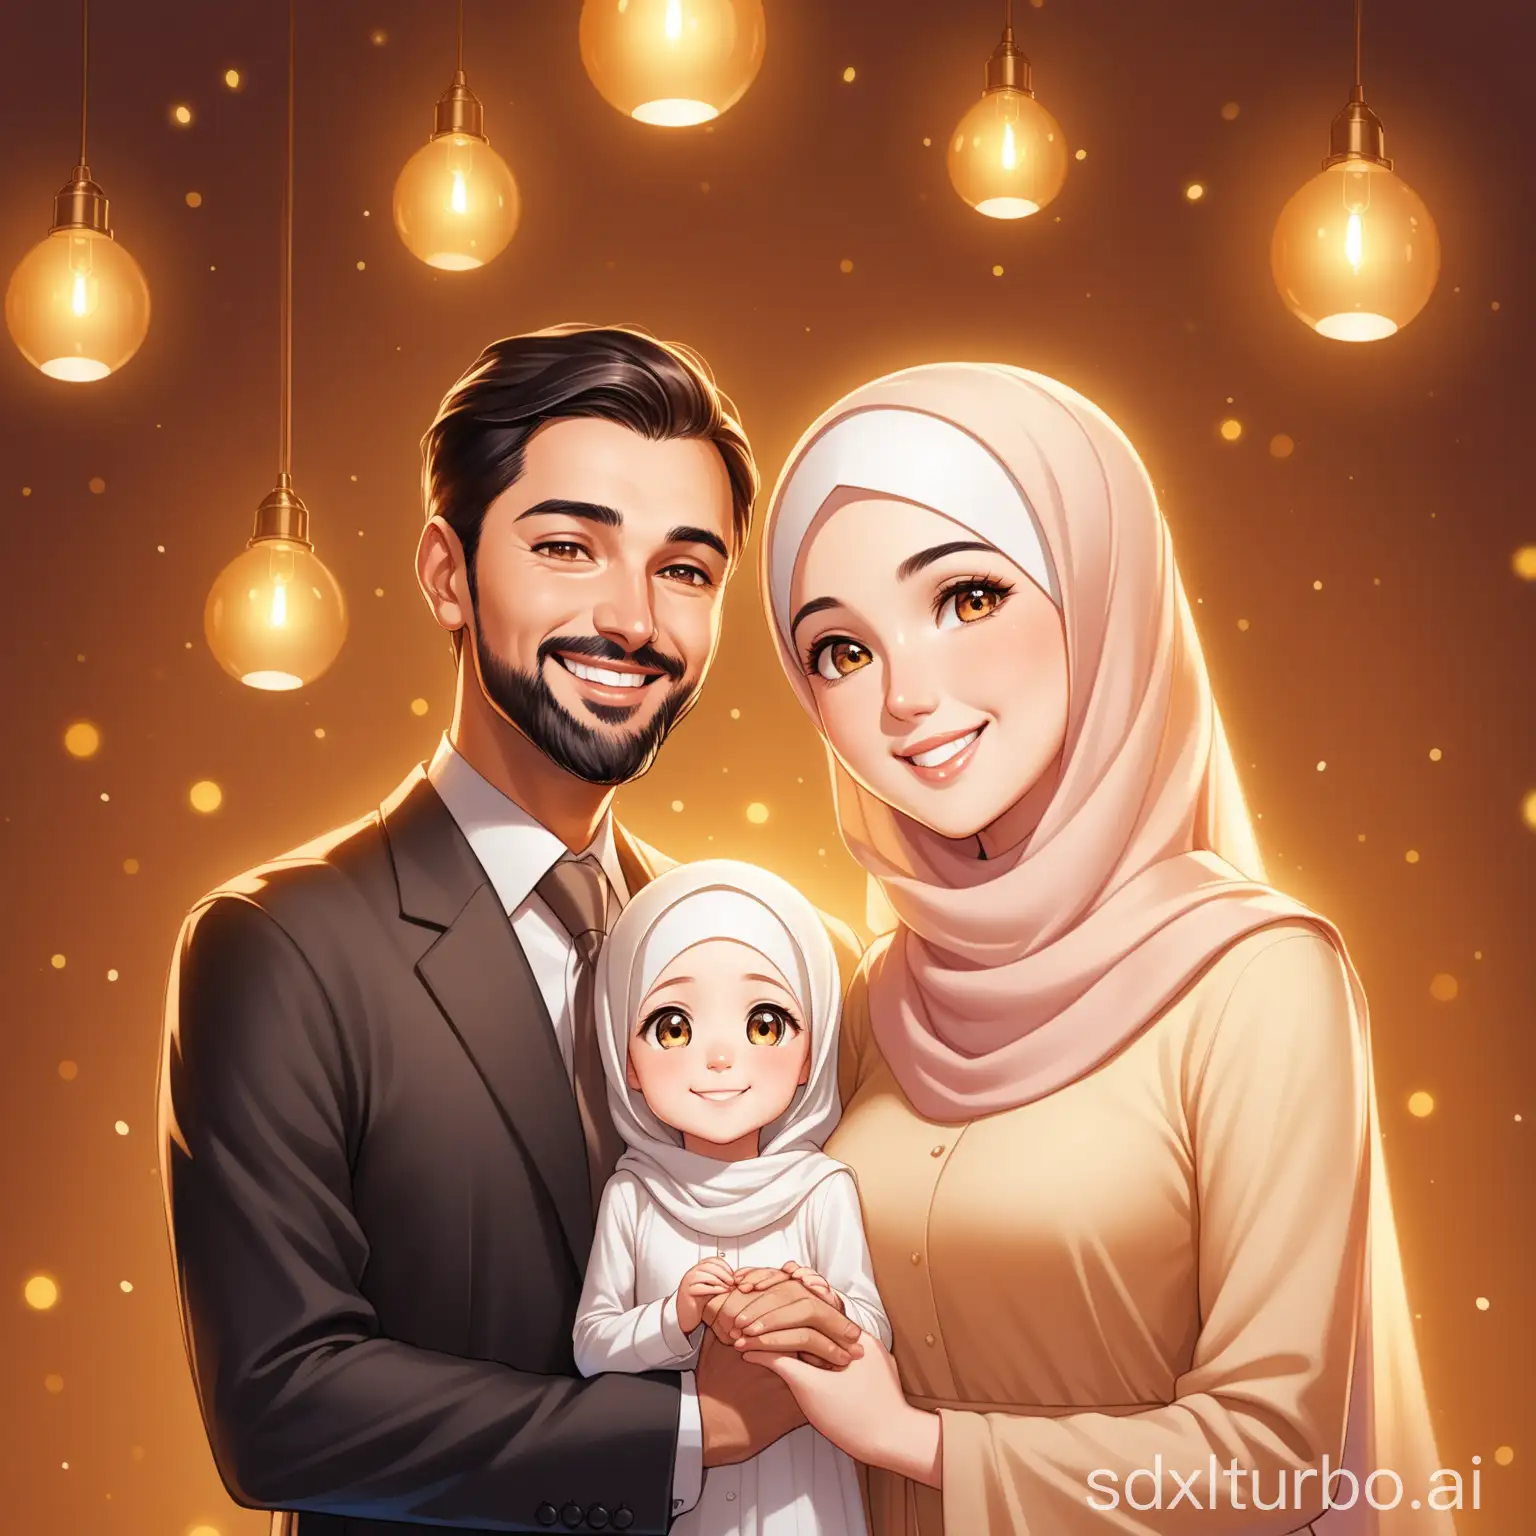 Heartwarming-Family-Portrait-Joyful-Bonding-of-Father-Mother-and-Daughter